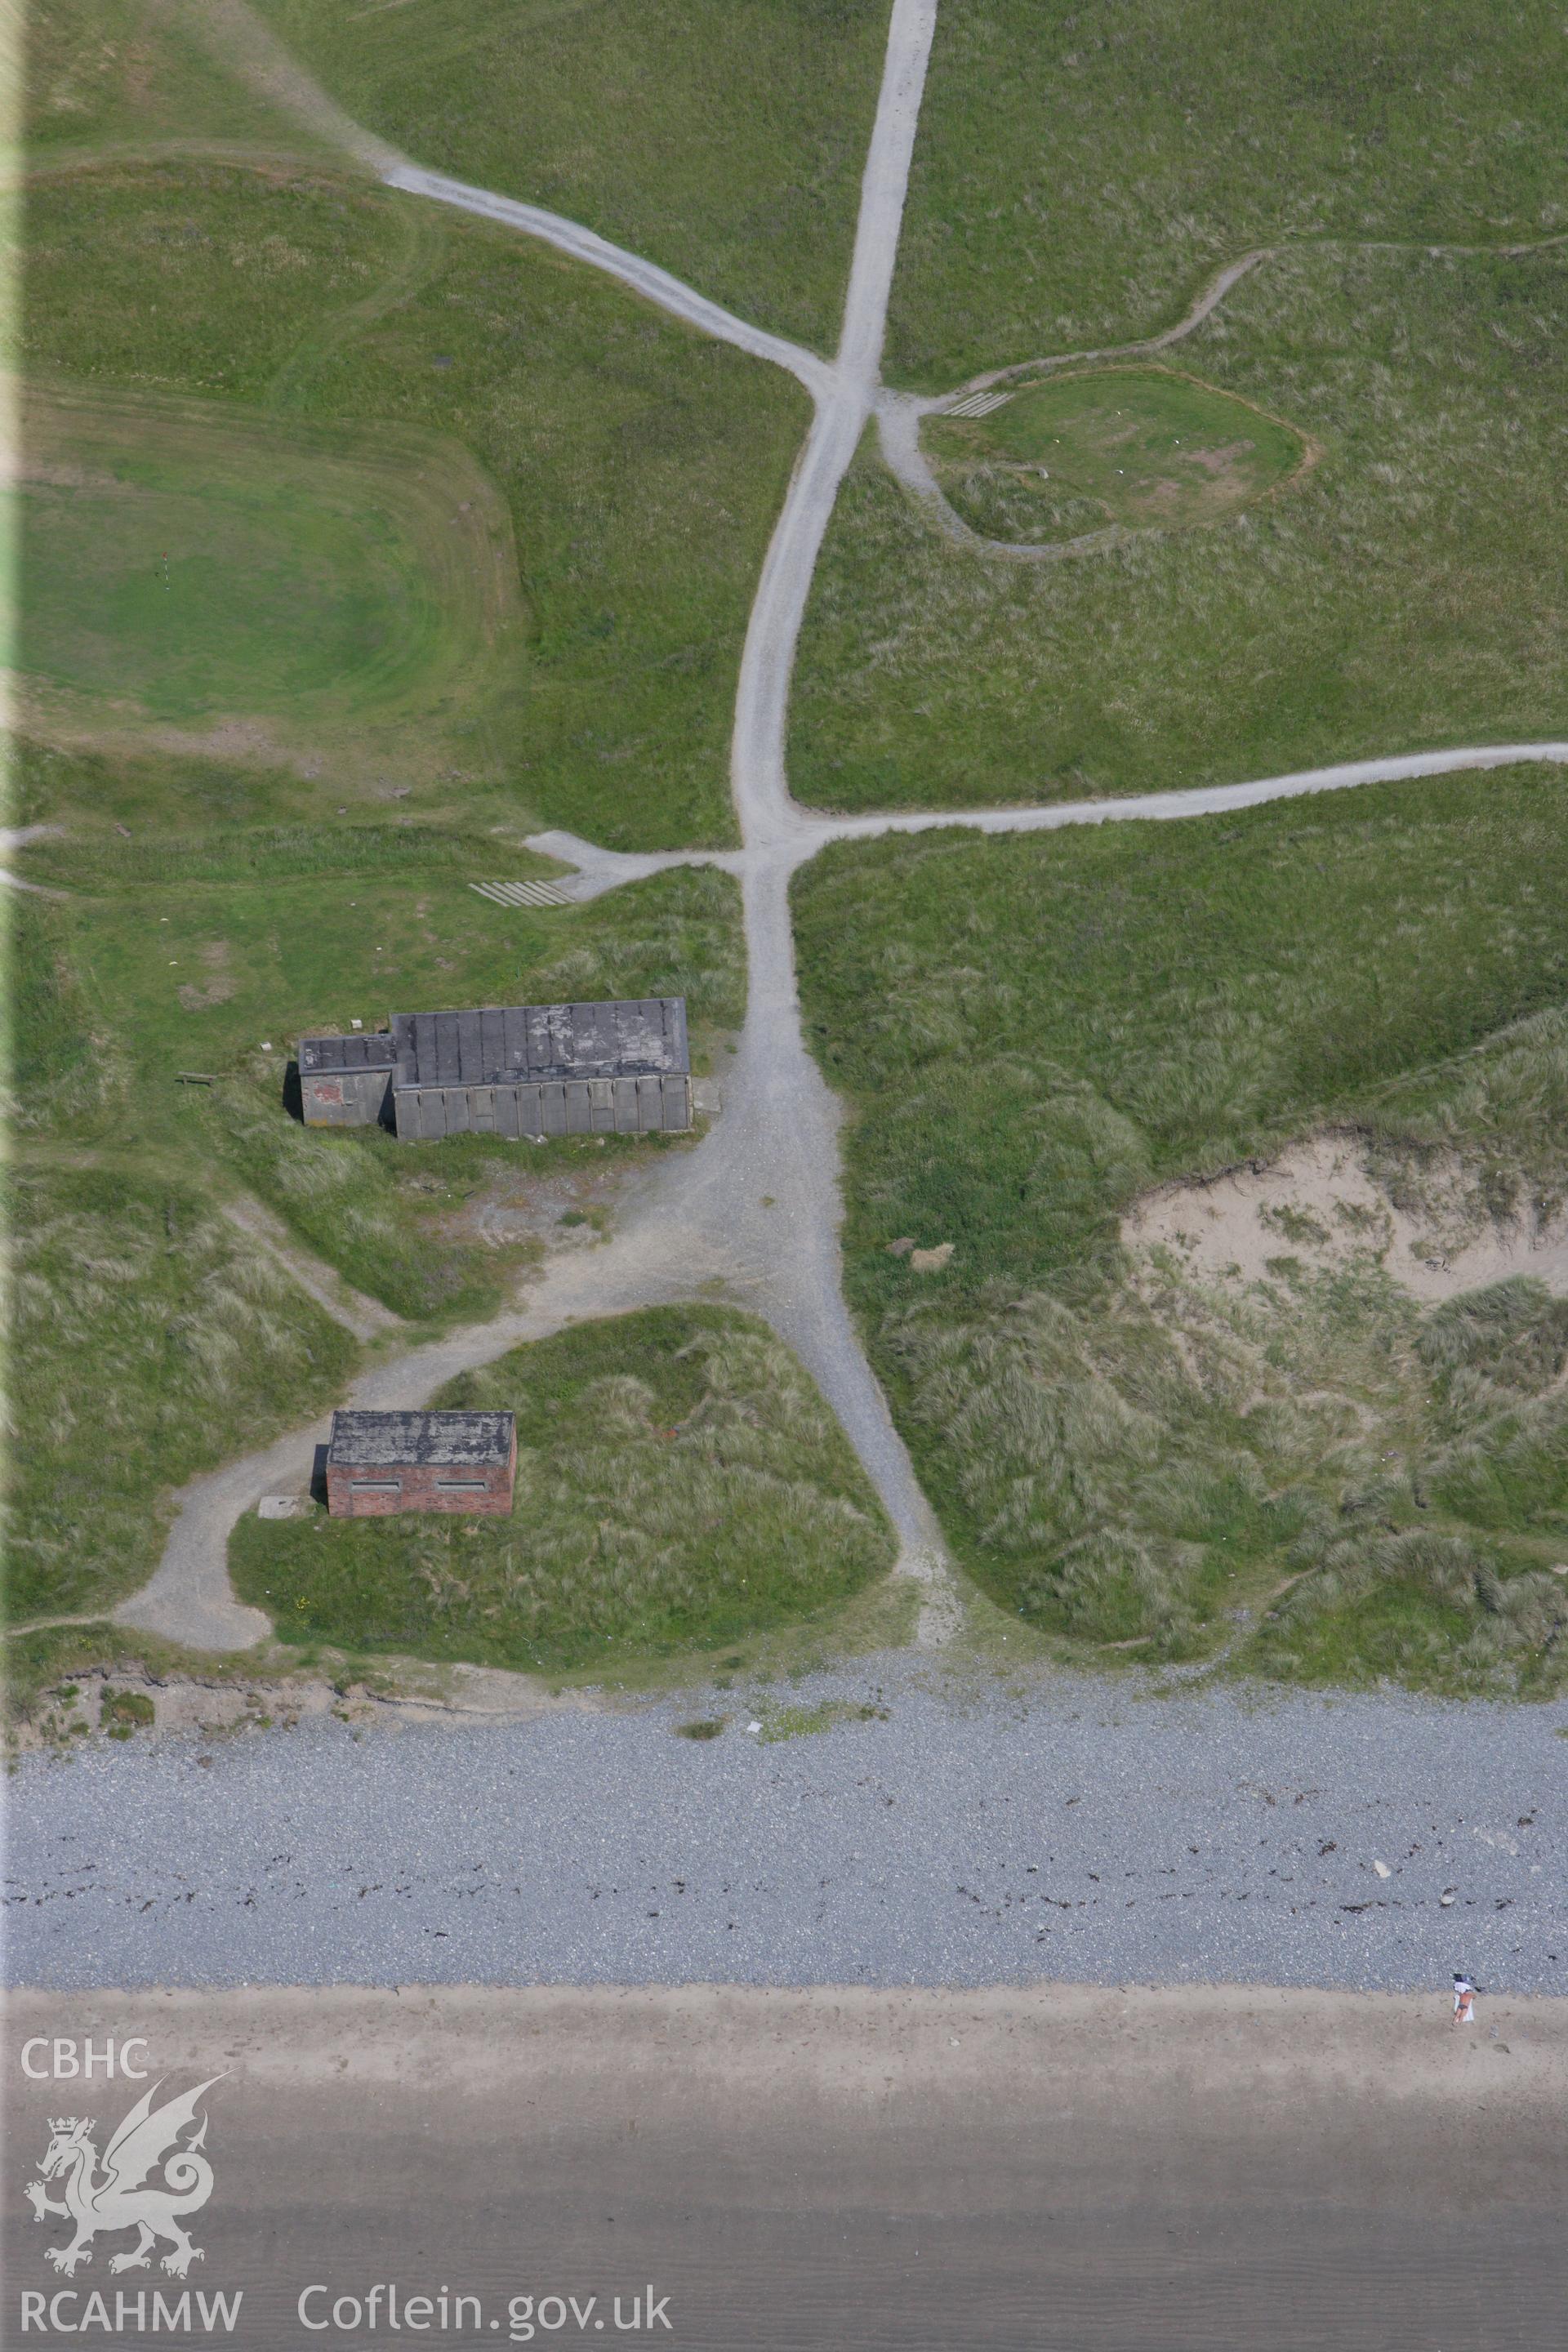 RCAHMW colour oblique aerial photograph of Ynyslas NNR, Foel Ynys, Firing Range Observation Post. Taken on 16 June 2009 by Toby Driver